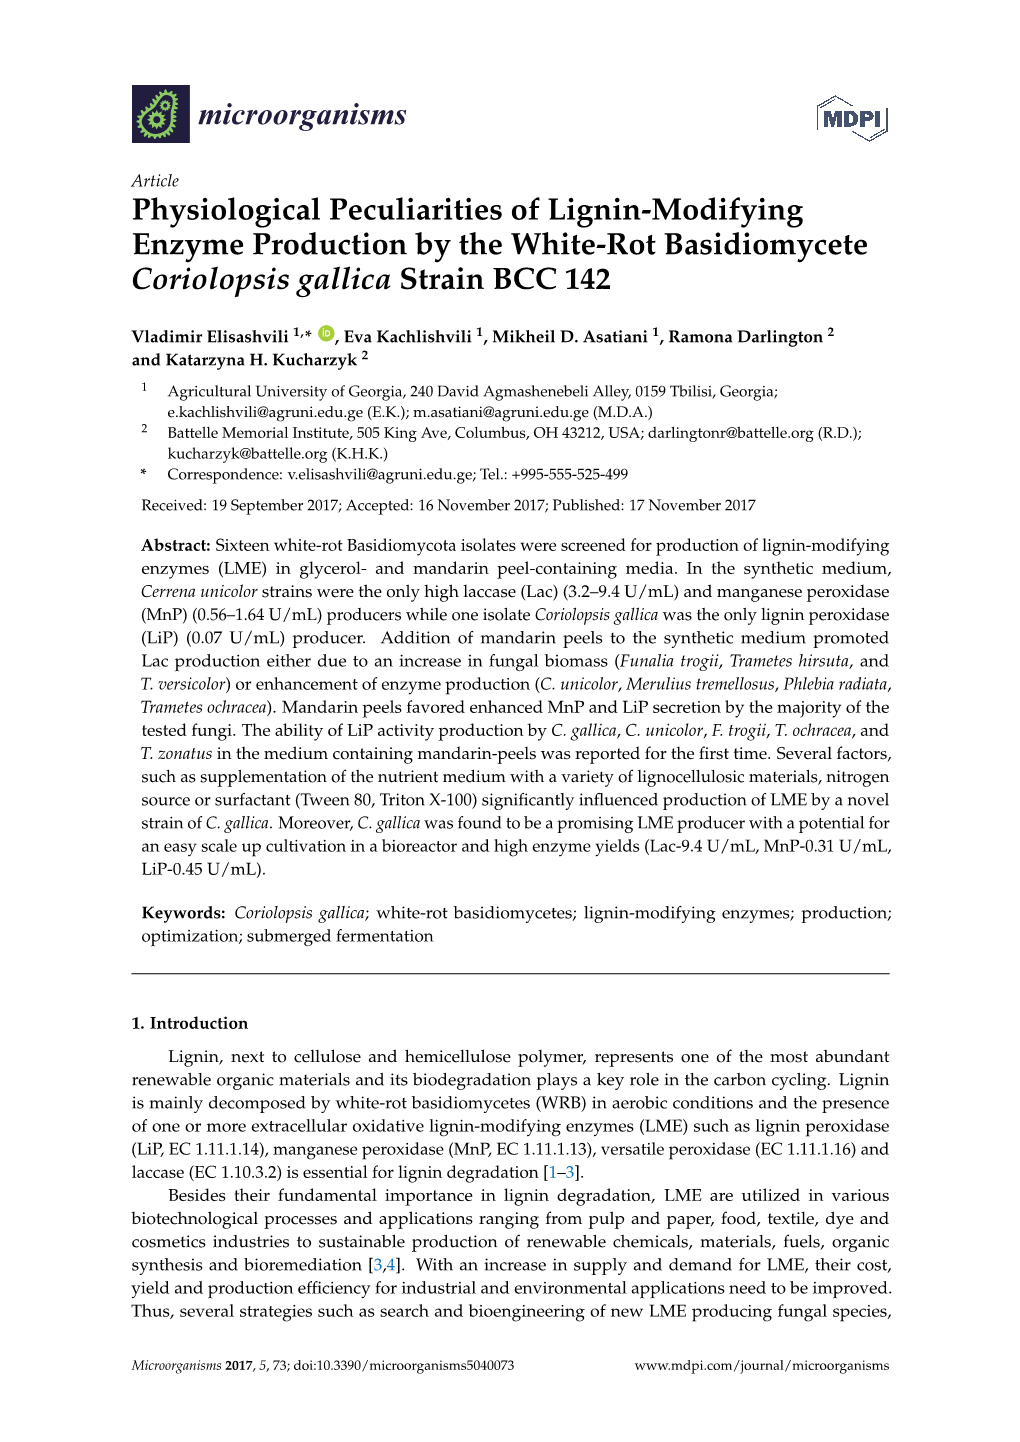 Physiological Peculiarities of Lignin-Modifying Enzyme Production by the White-Rot Basidiomycete Coriolopsis Gallica Strain BCC 142